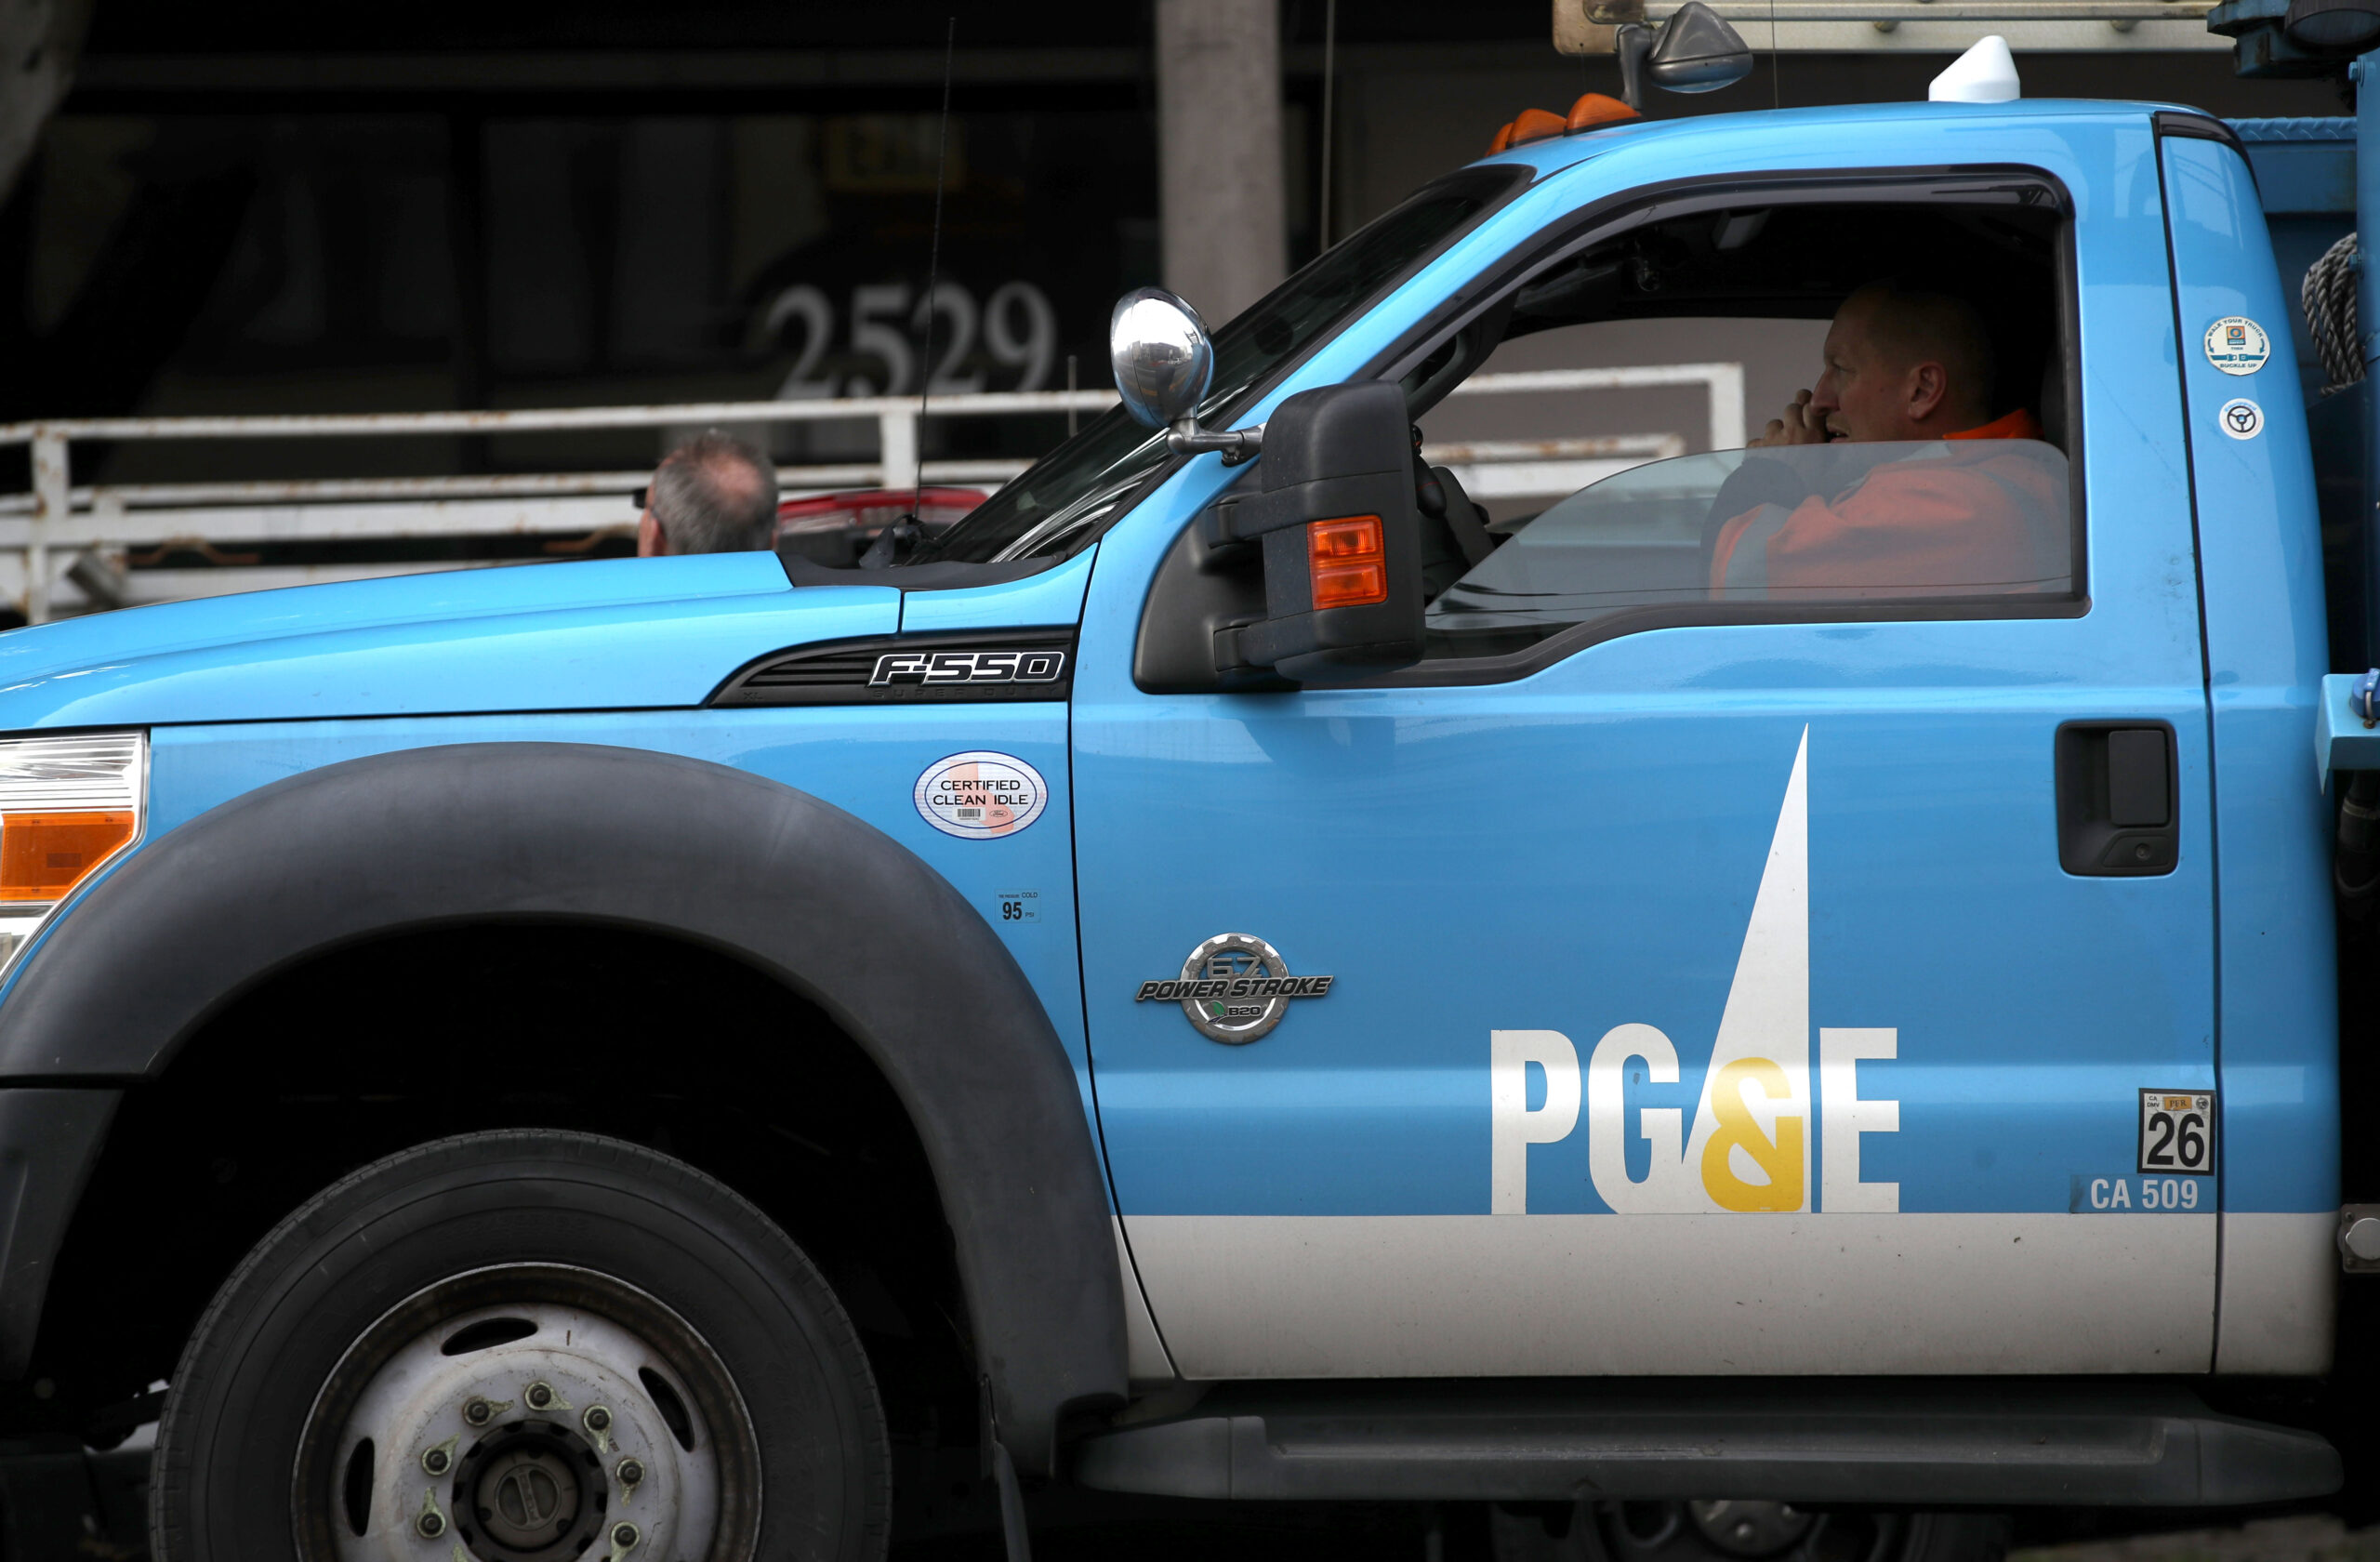 People Really Hate PG&E, as Utility Ranks Dead Last in Customer Satisfaction Survey